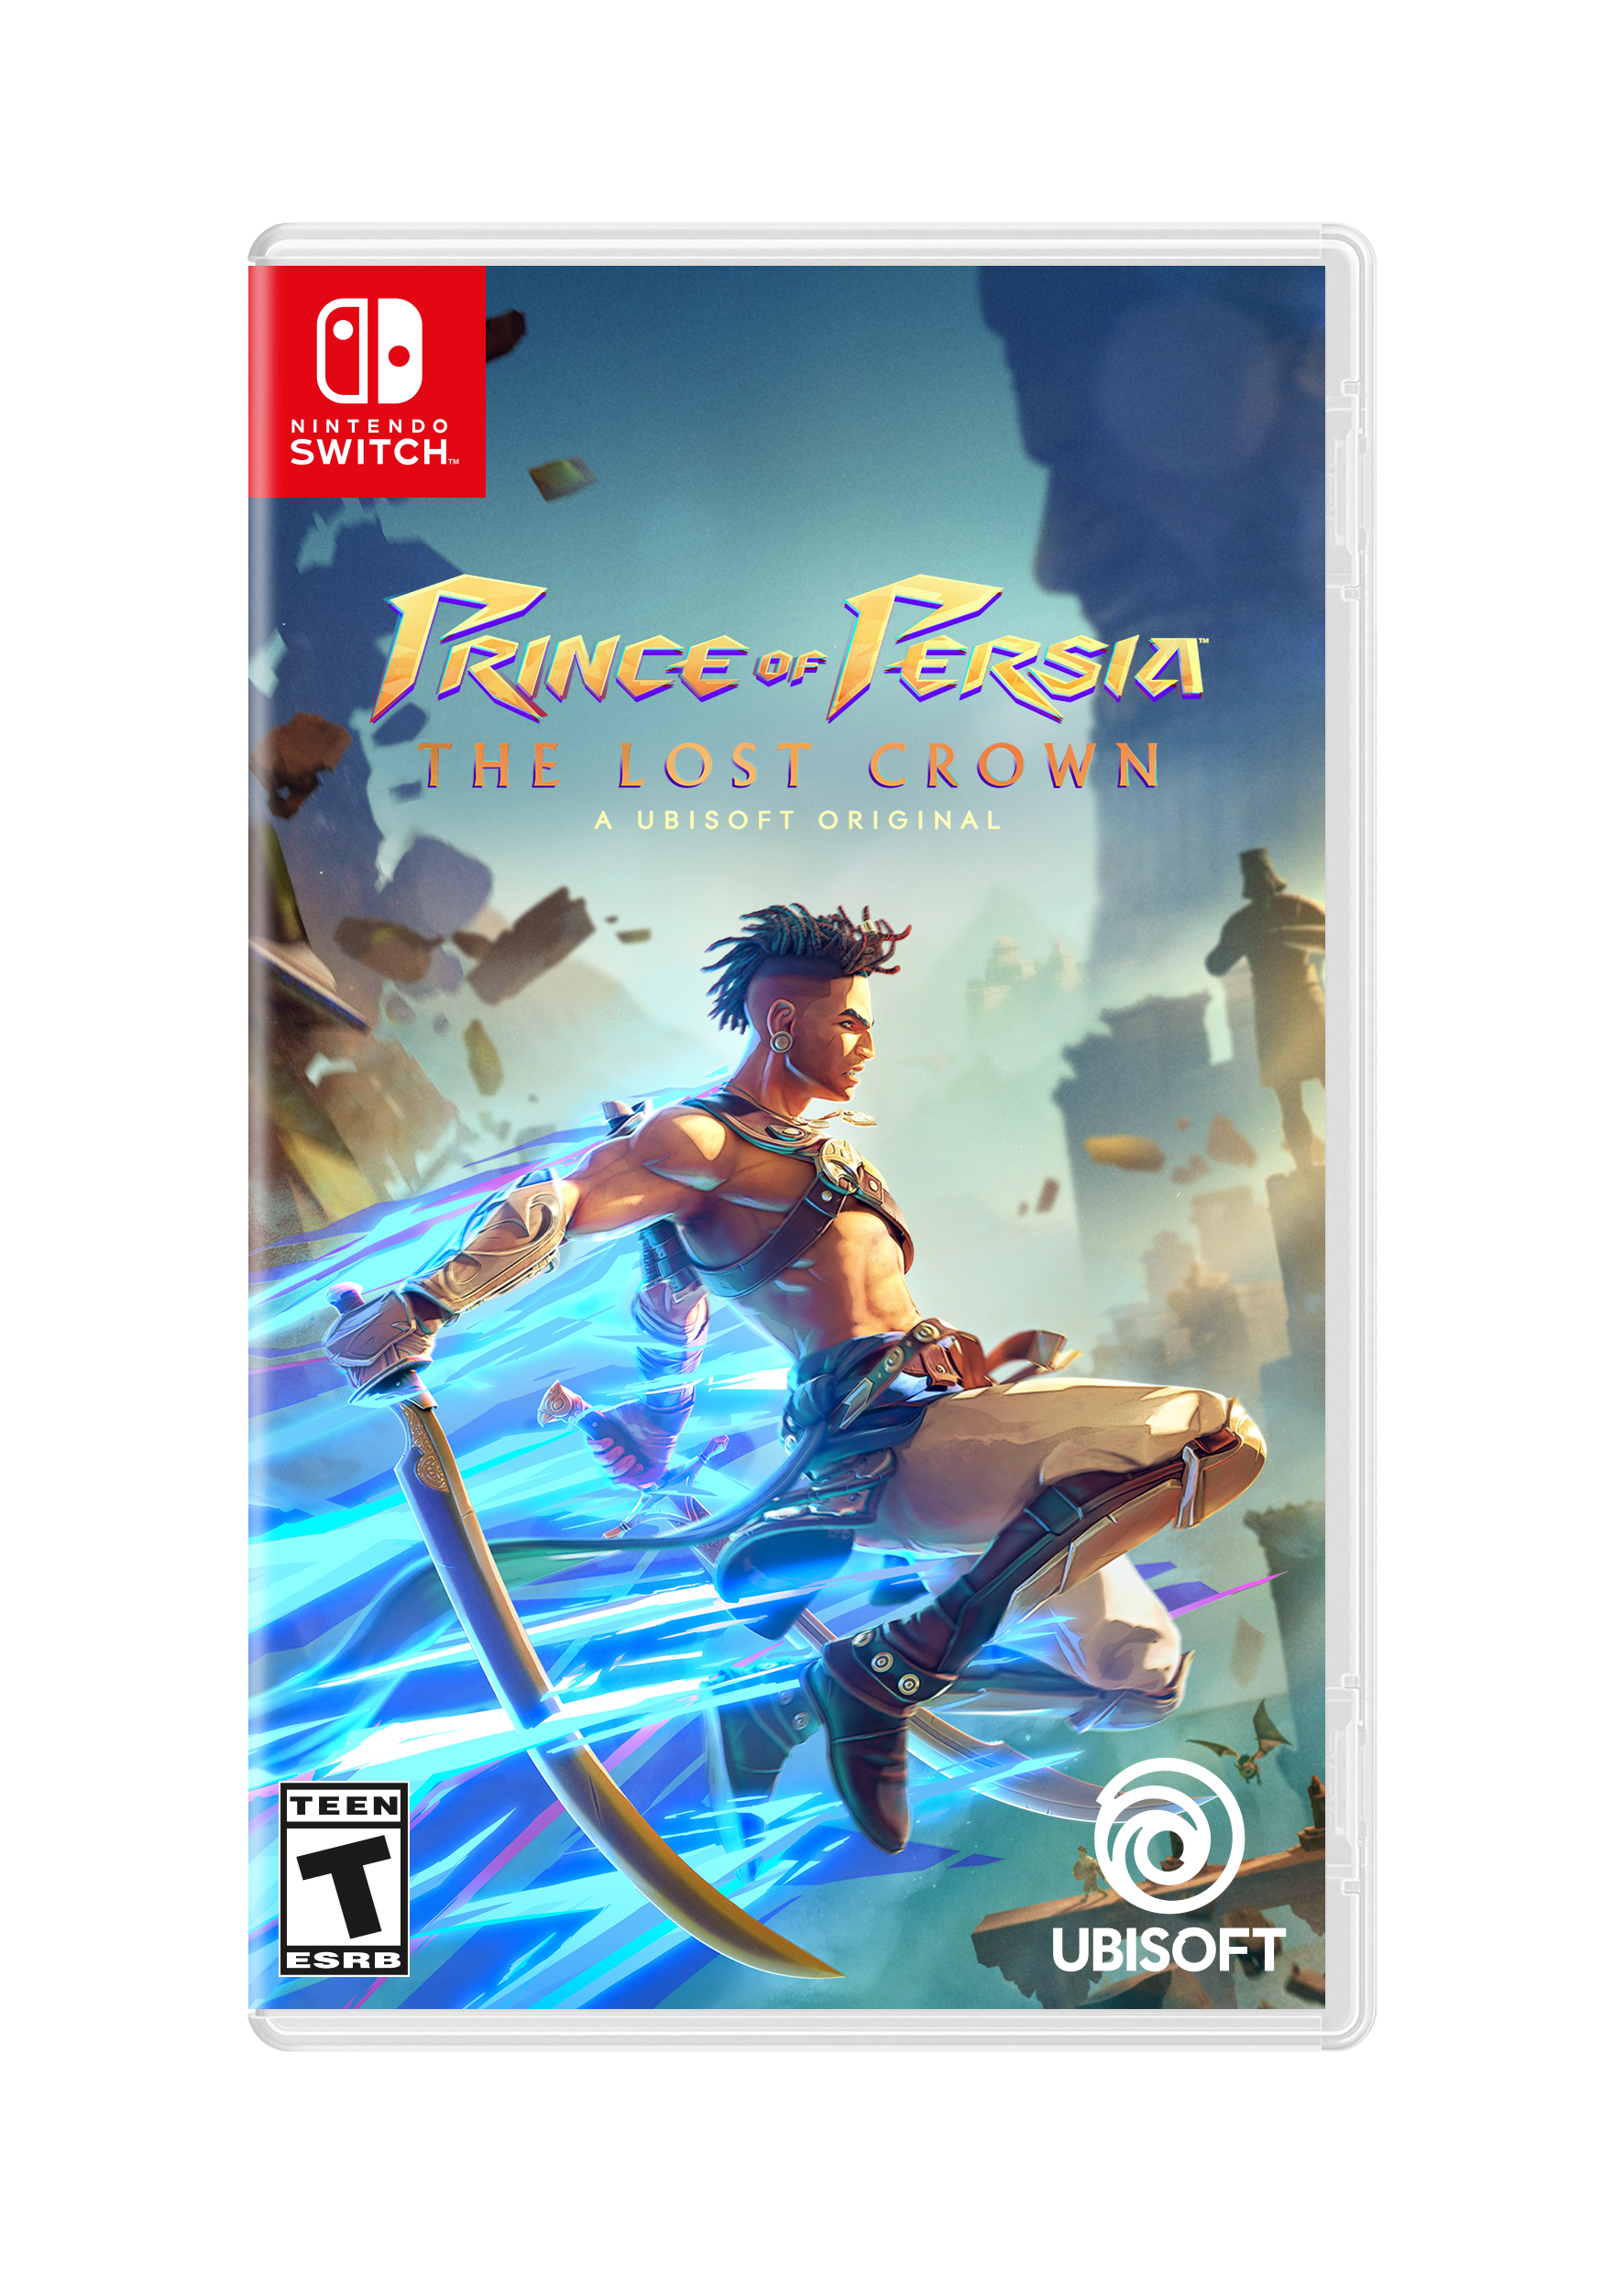 Best Prince of Persia The Lost Crown settings for Nintendo Switch